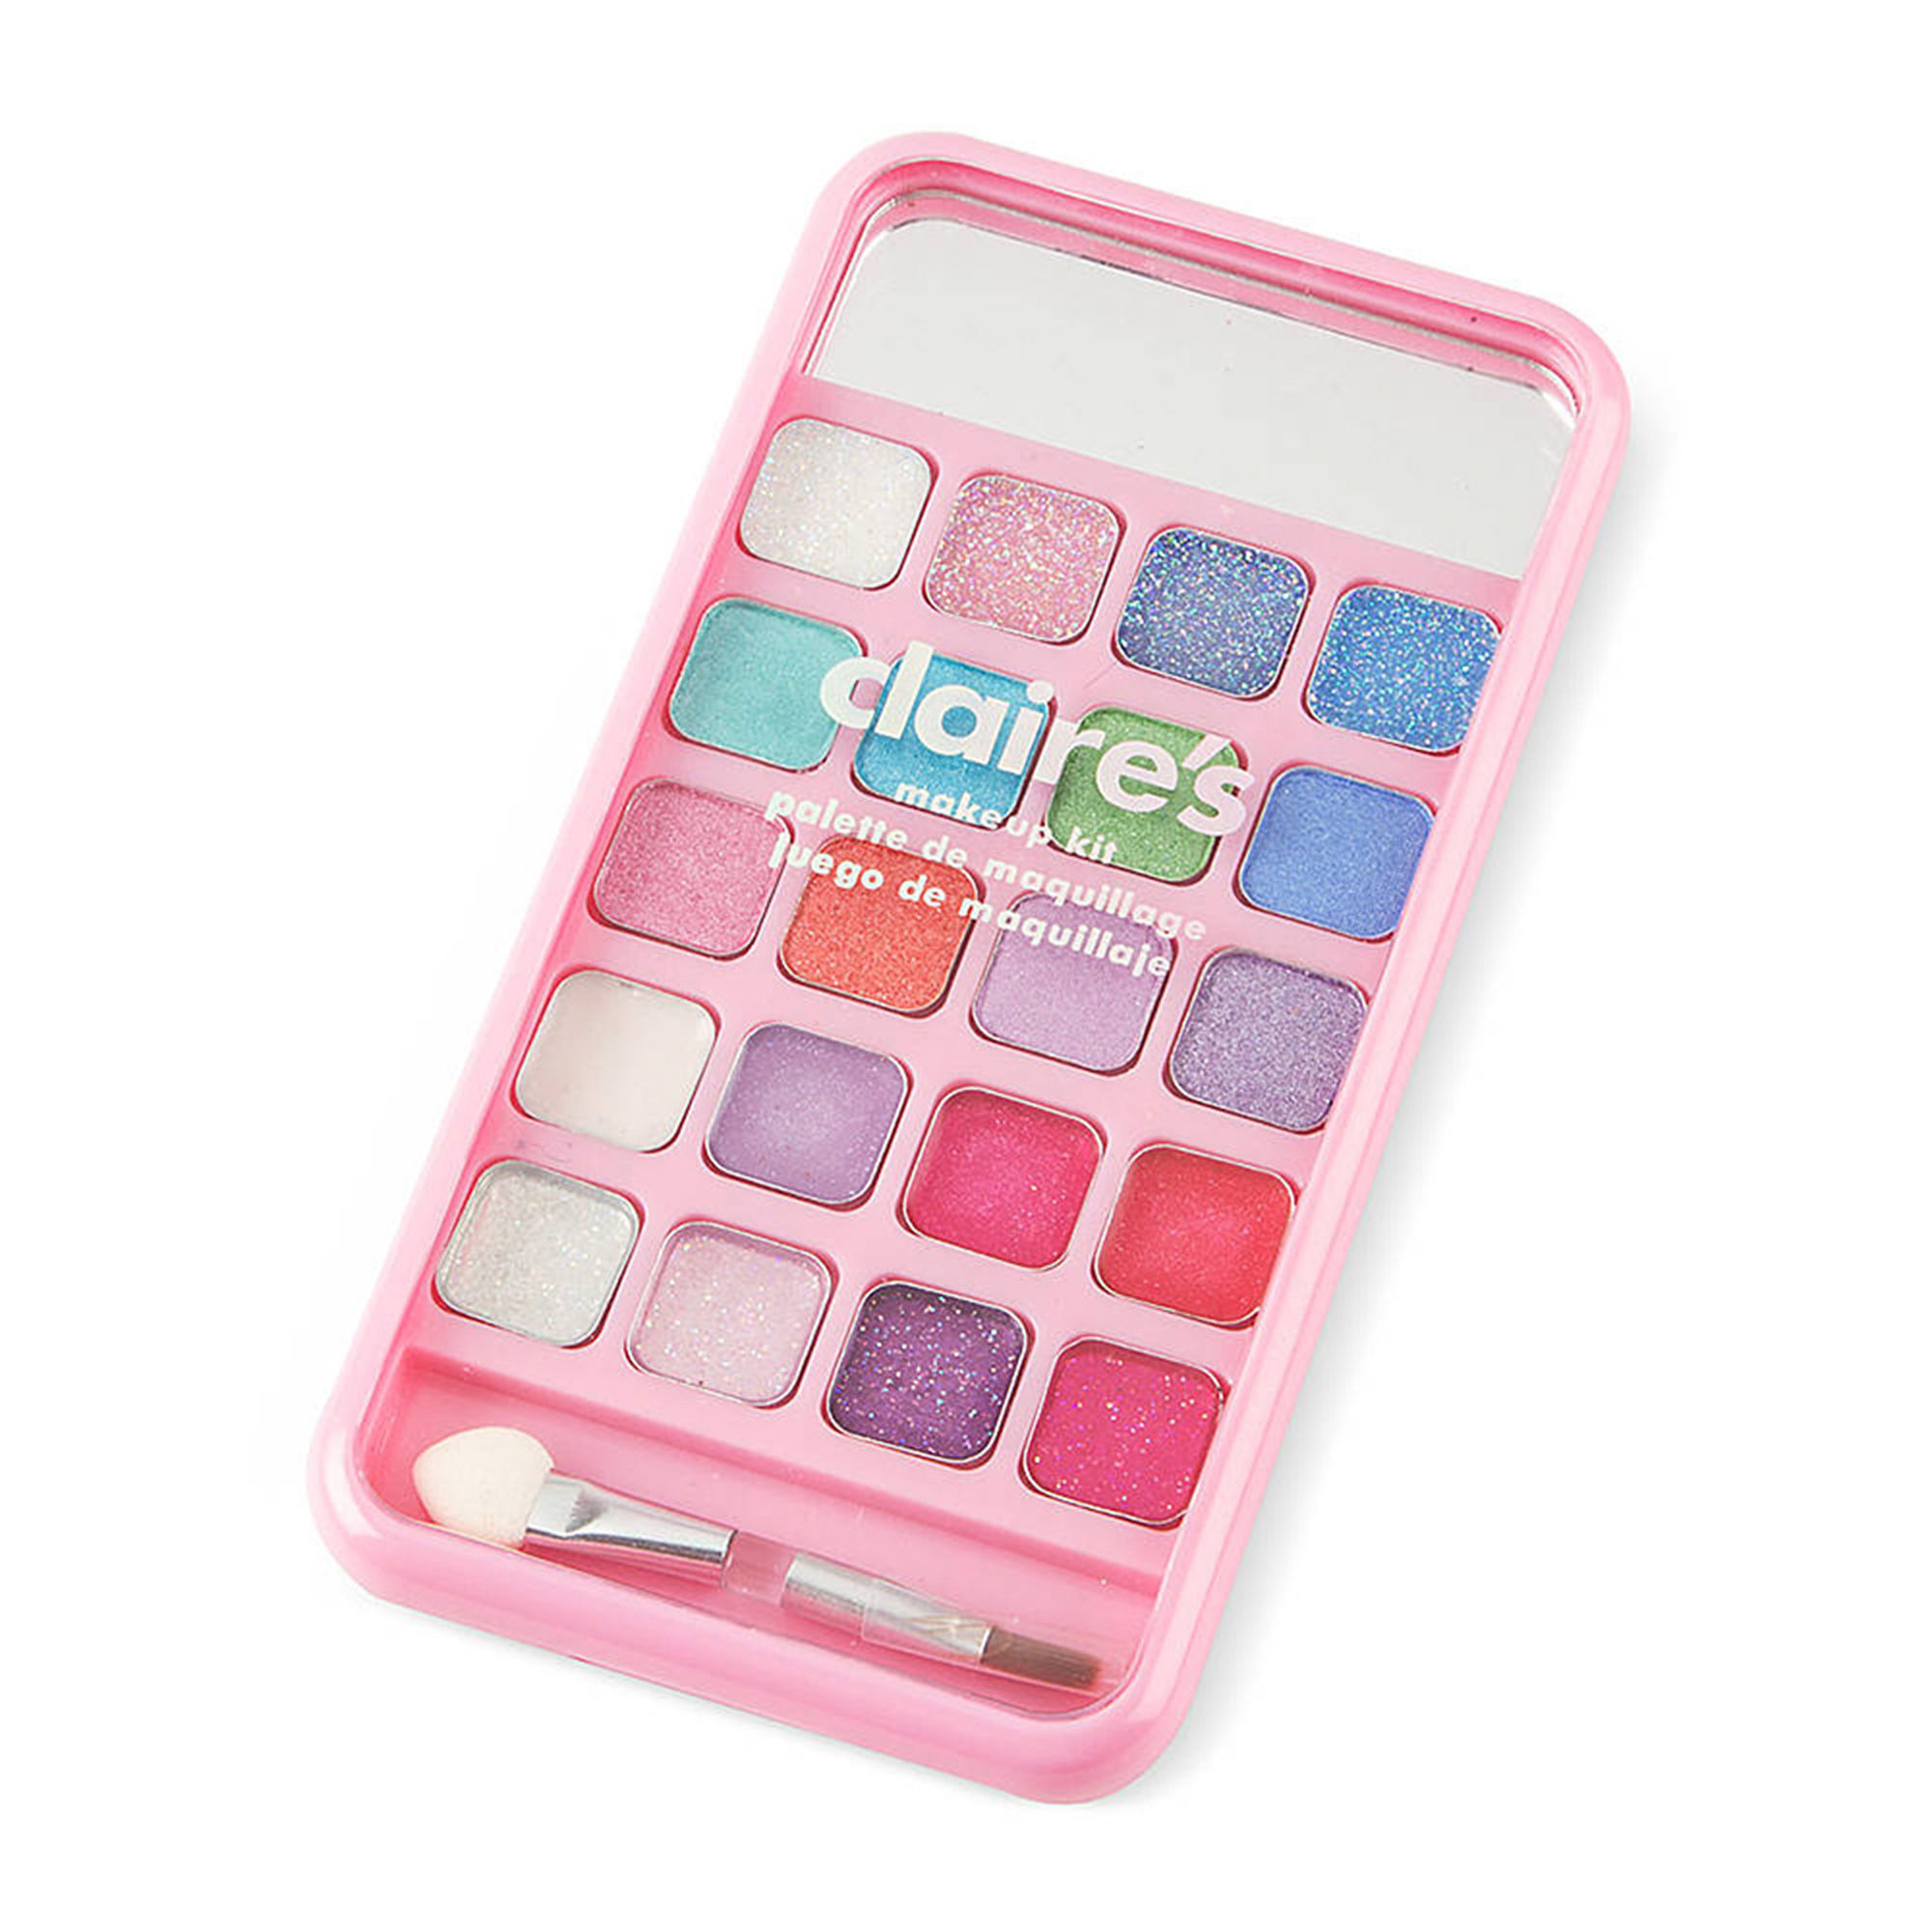 Bling Crown Smartphone Makeup Kit | Claire's US